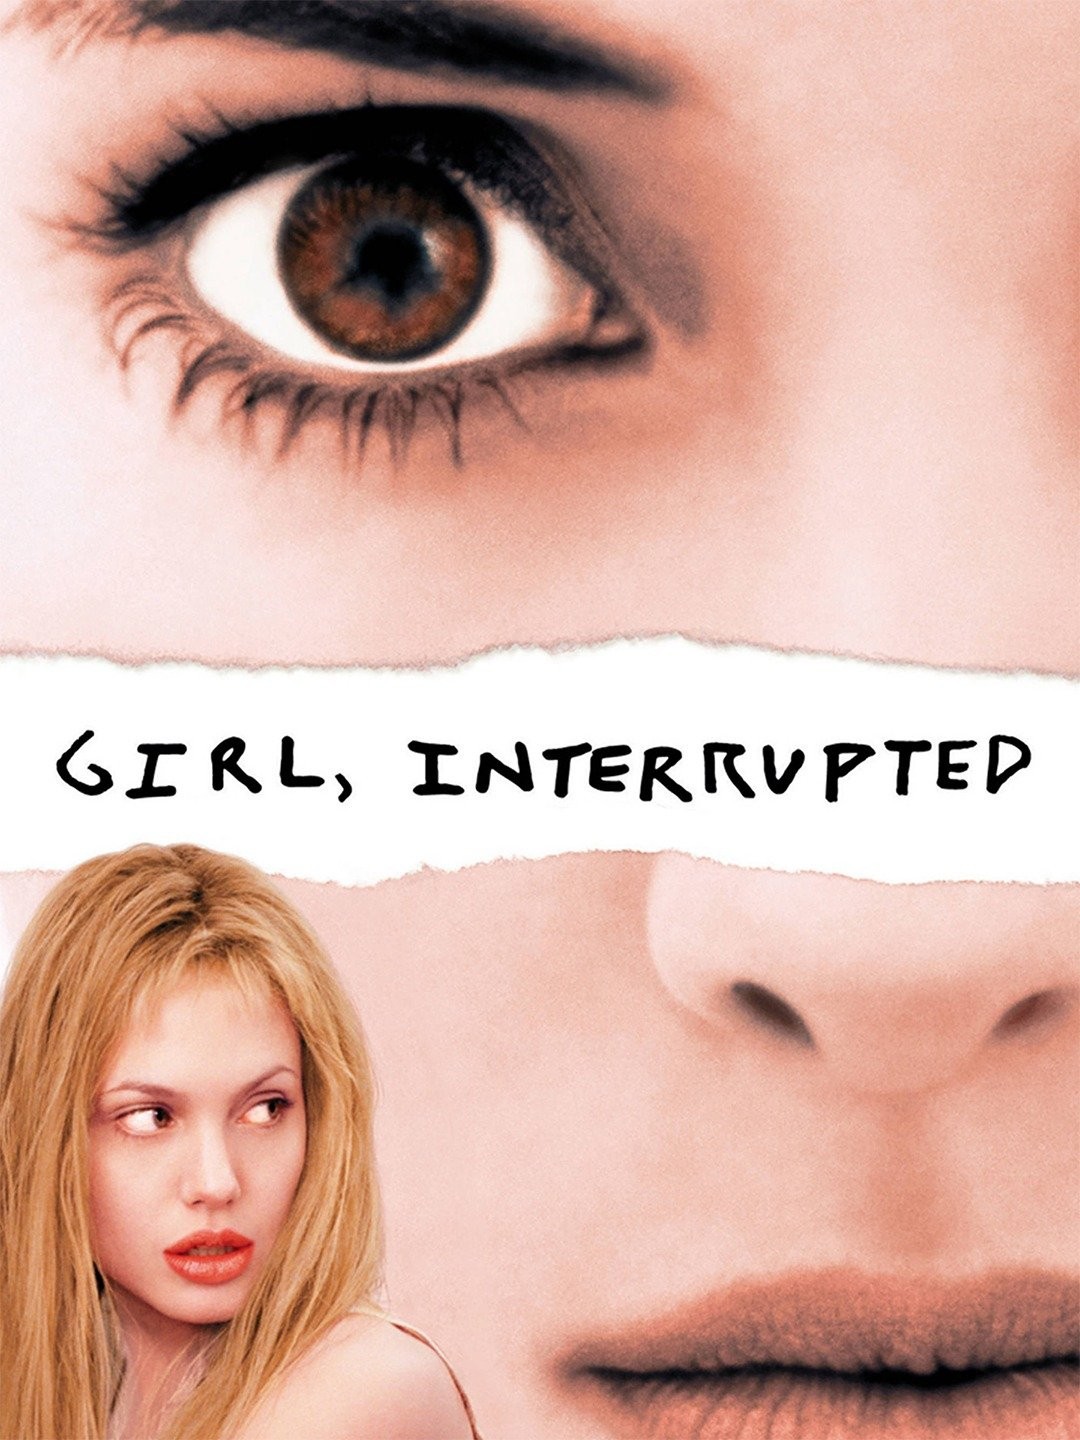 Girl interrupted age rating